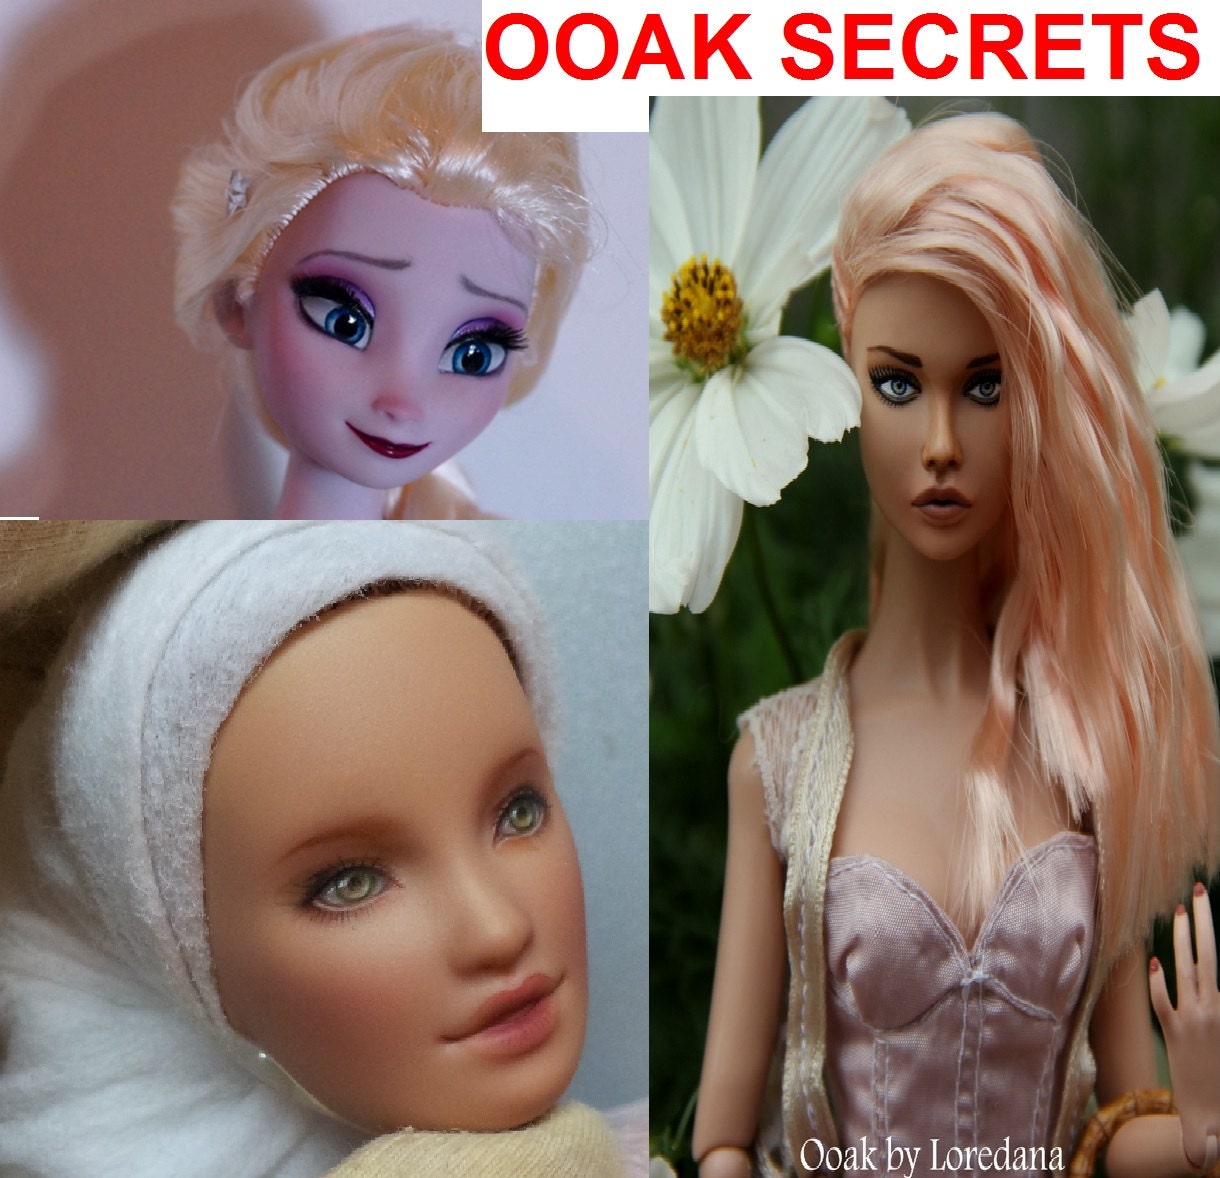 Ooak Doll Repainting And Hairstyle Secrets From The Experts Pdf Tutorial 2 Books Lot 300 Pages Photos